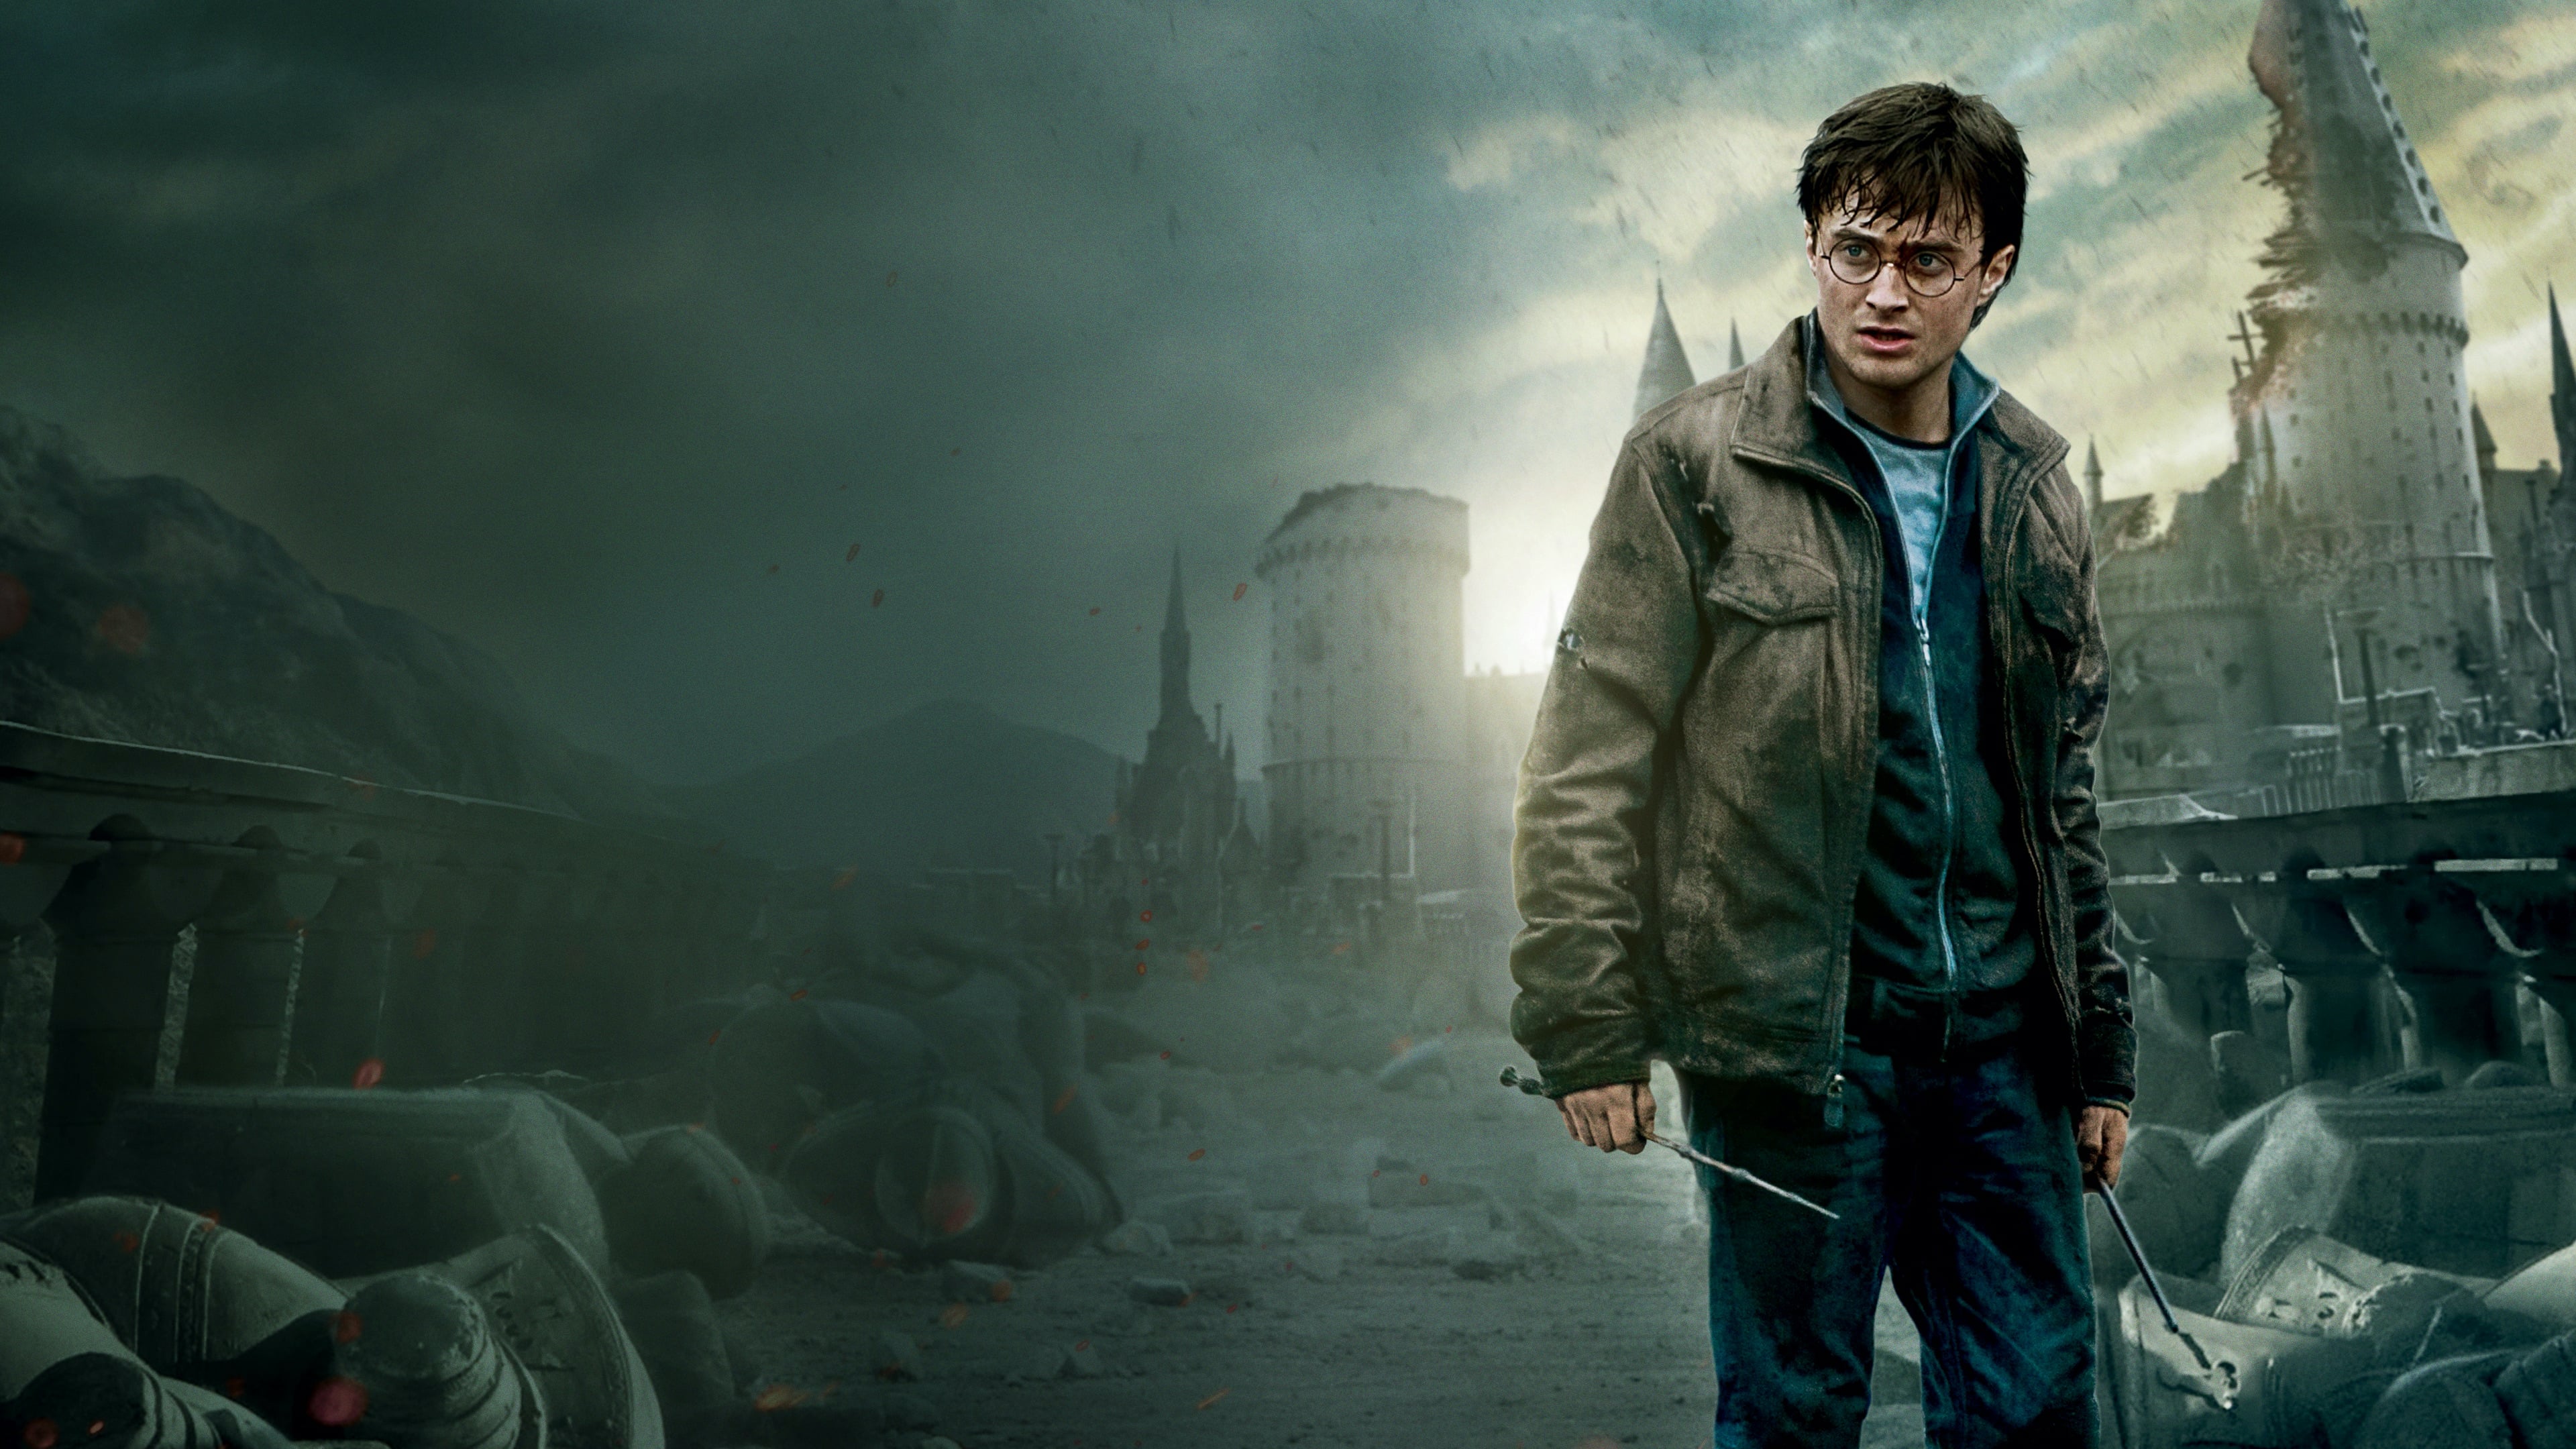 Harry Potter and the Deathly Hallows: Part 2 4k Ultra HD Wallpaper